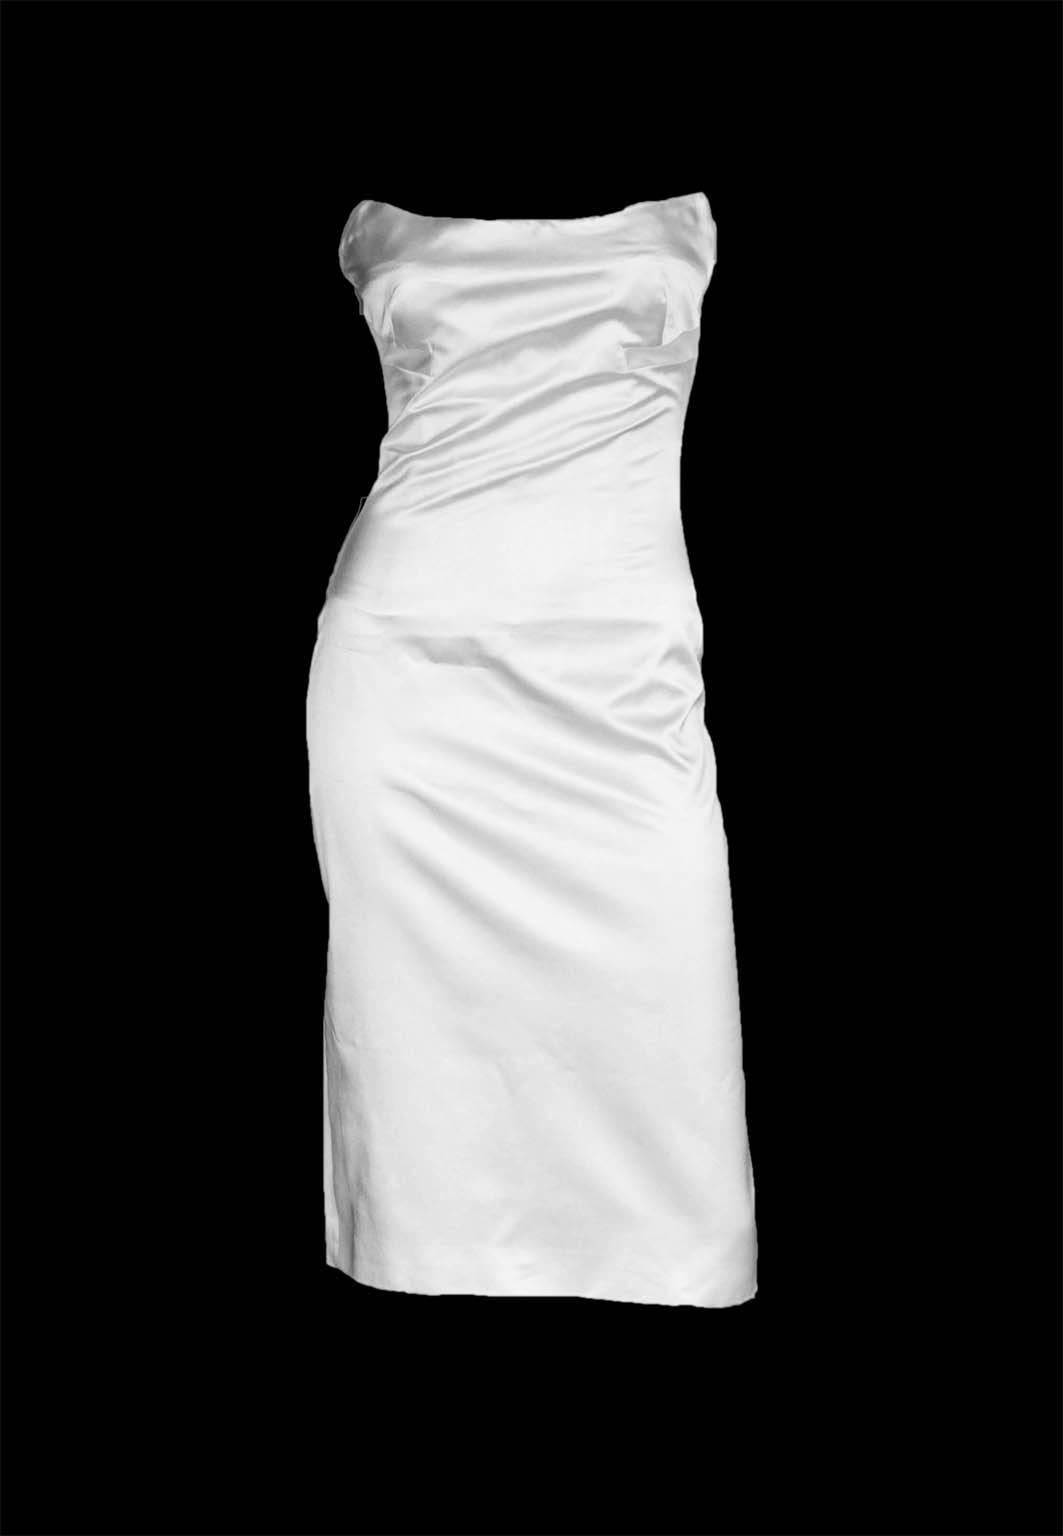 Rare & Iconic Tom Ford For Gucci Spring Summer 2001 White Strapless Silk Corset Runway Dress To Fit An Italian Size 36!

Who could ever forget that heavenly white silk corset dress from Tom Ford's incredible spring/summer 2001 collection for